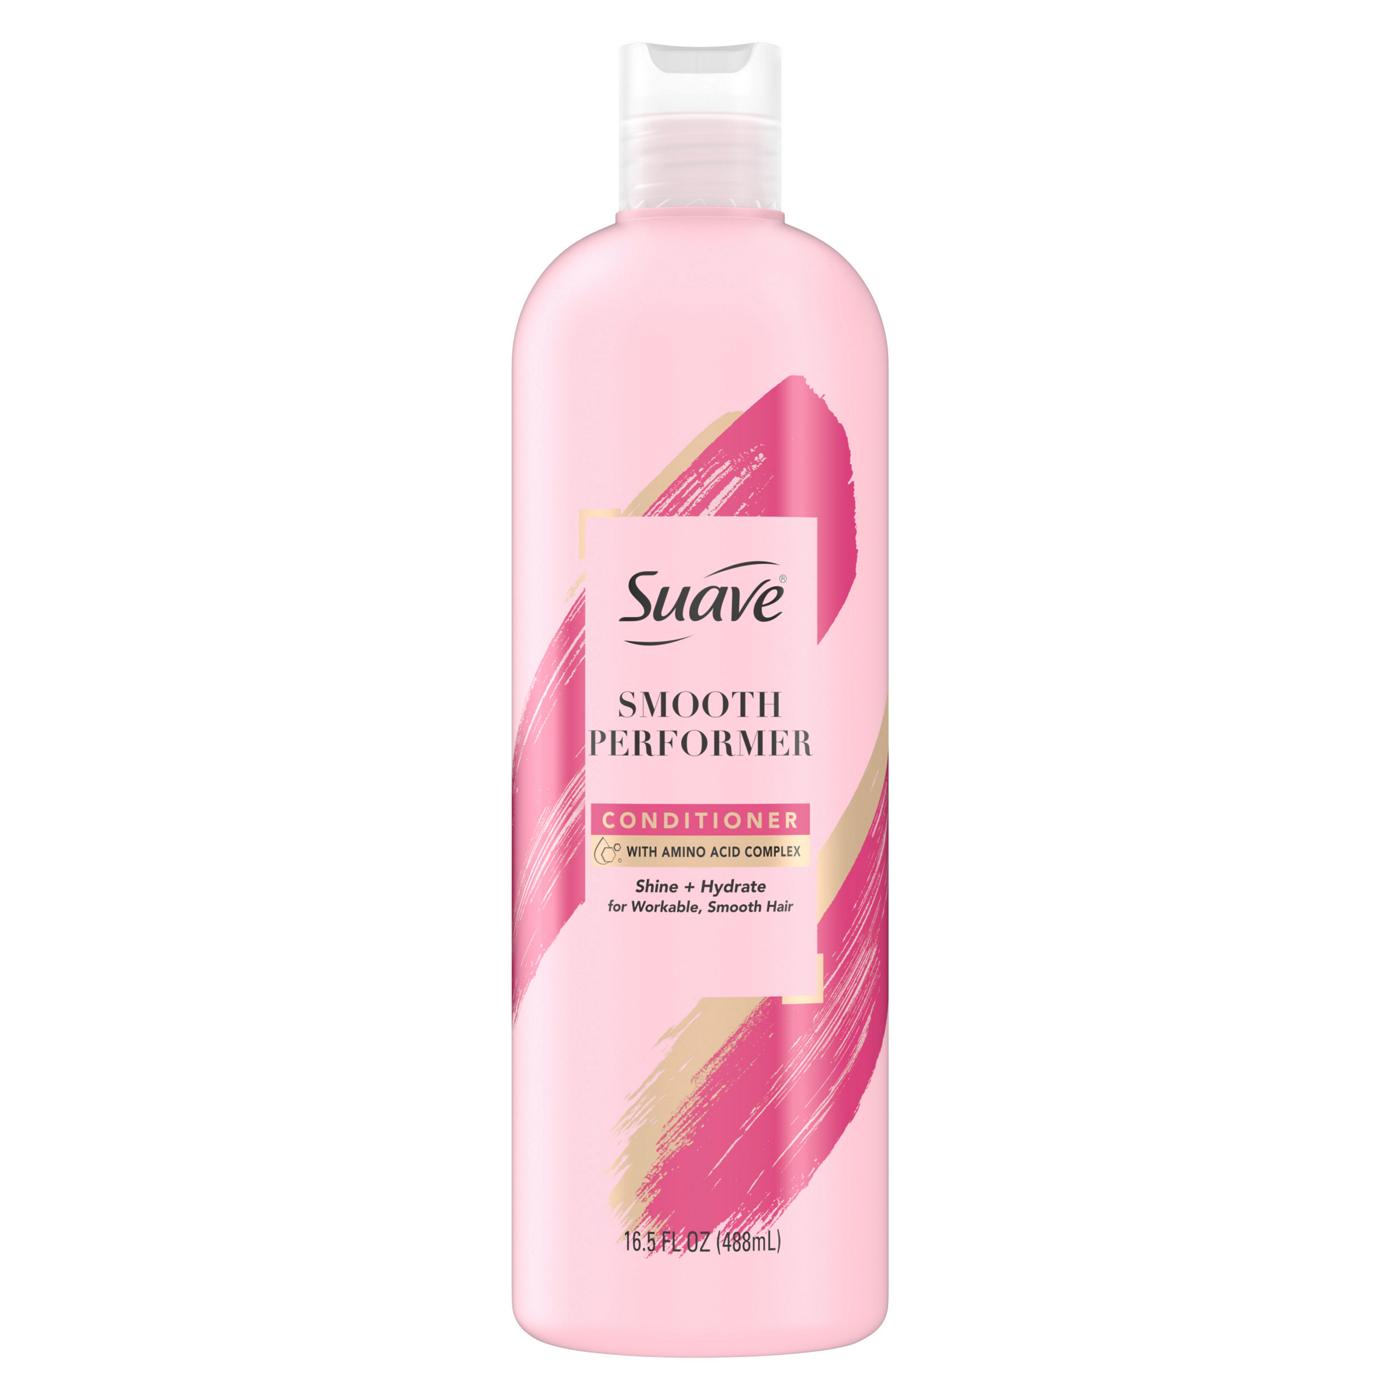 Suave Pink Smooth Performer Conditioner; image 1 of 5